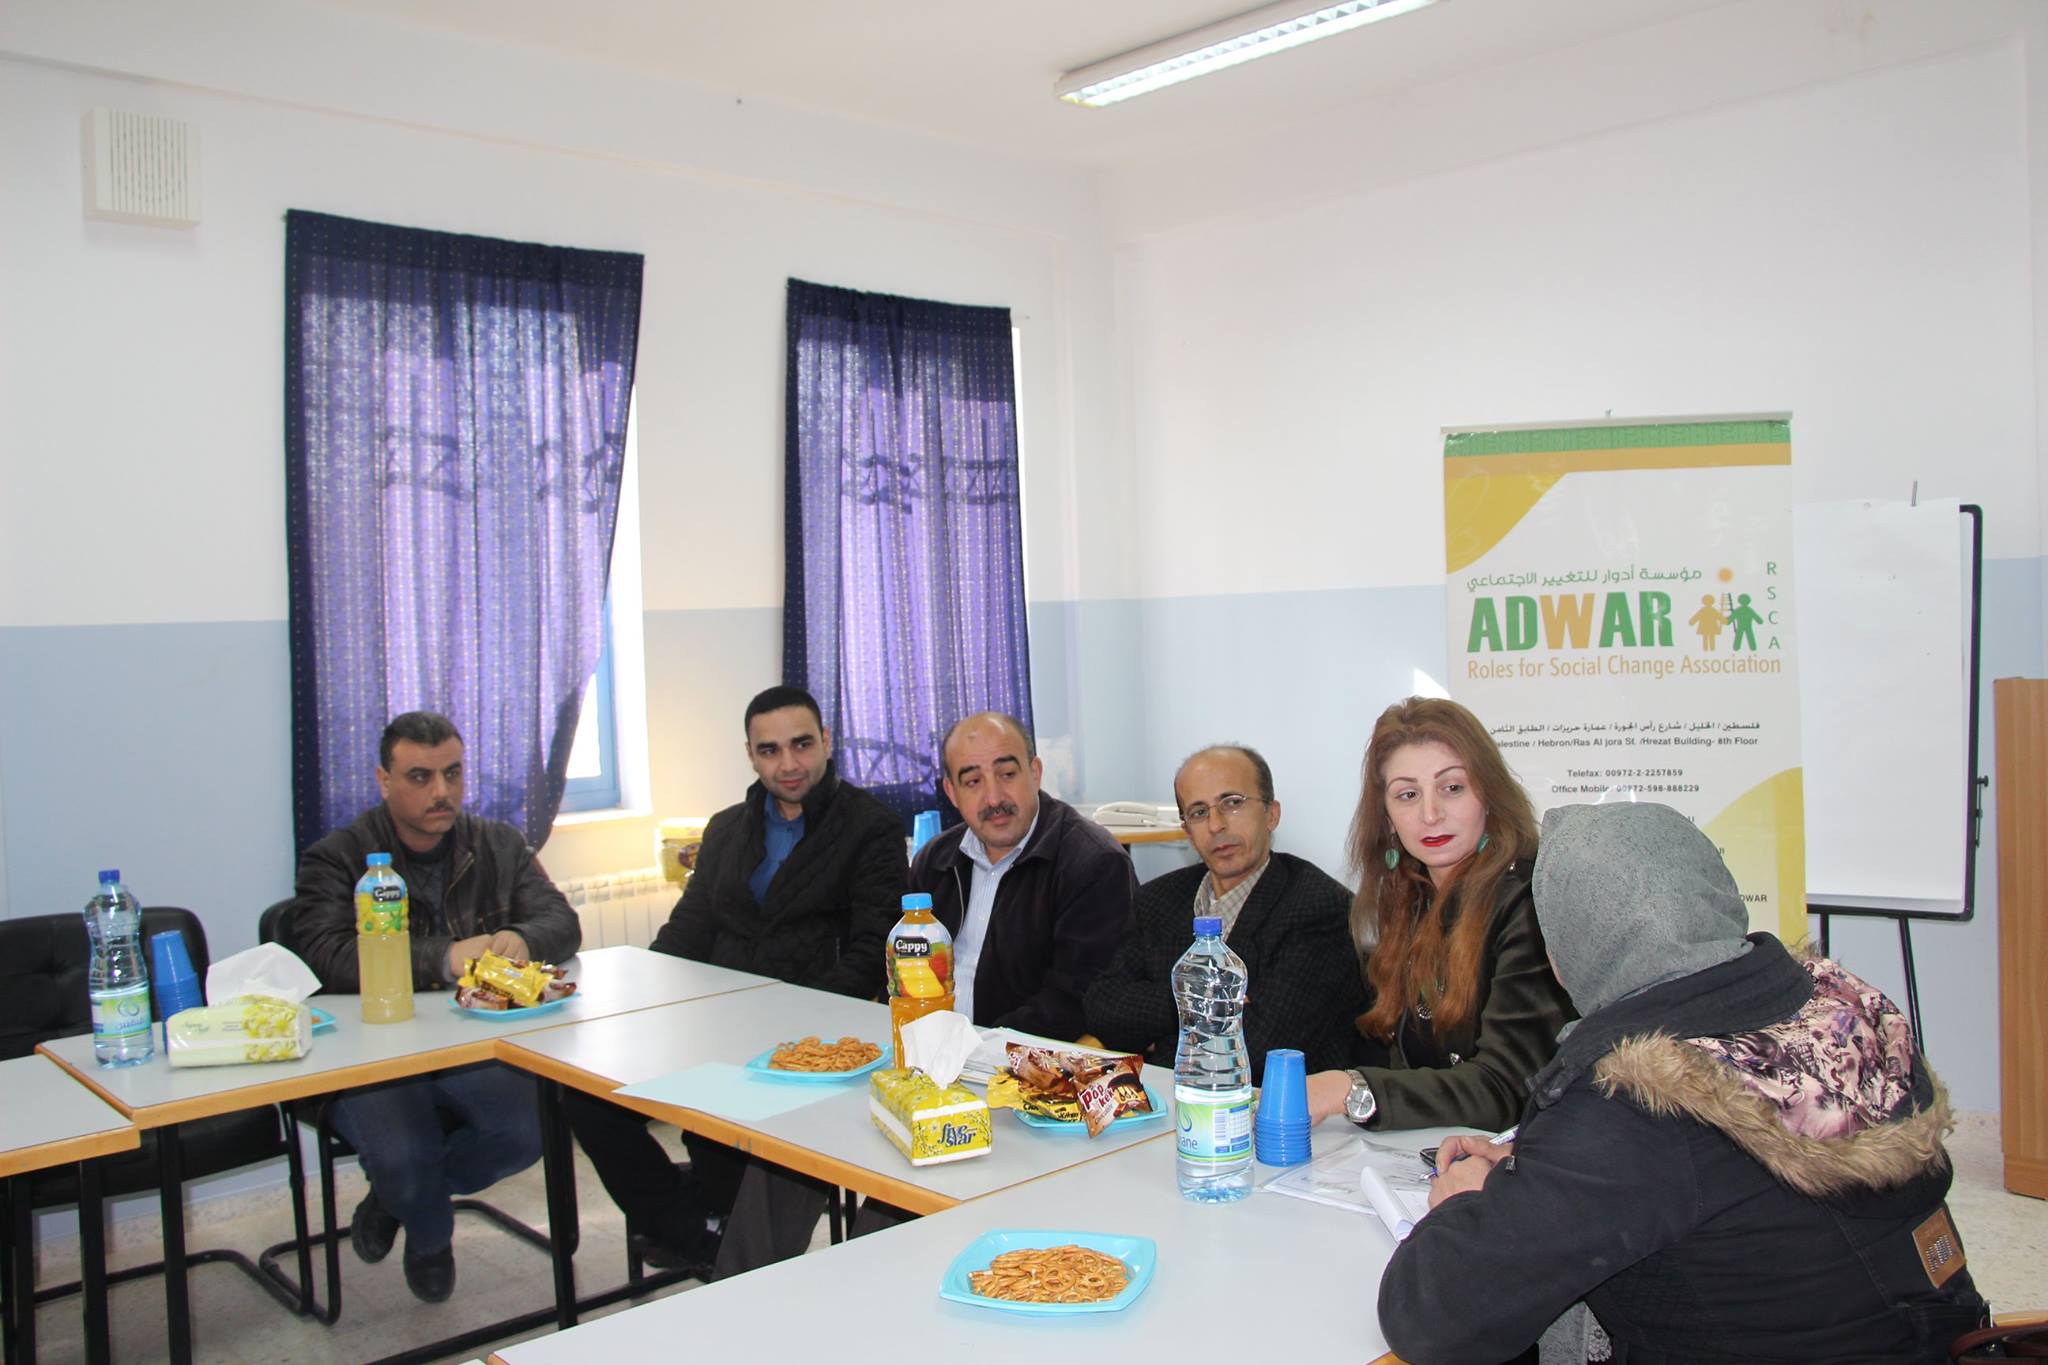  Halhoul Vocational Training Center in partnership with ADWAR finished the training program on Computer Numerical Control (CNC)